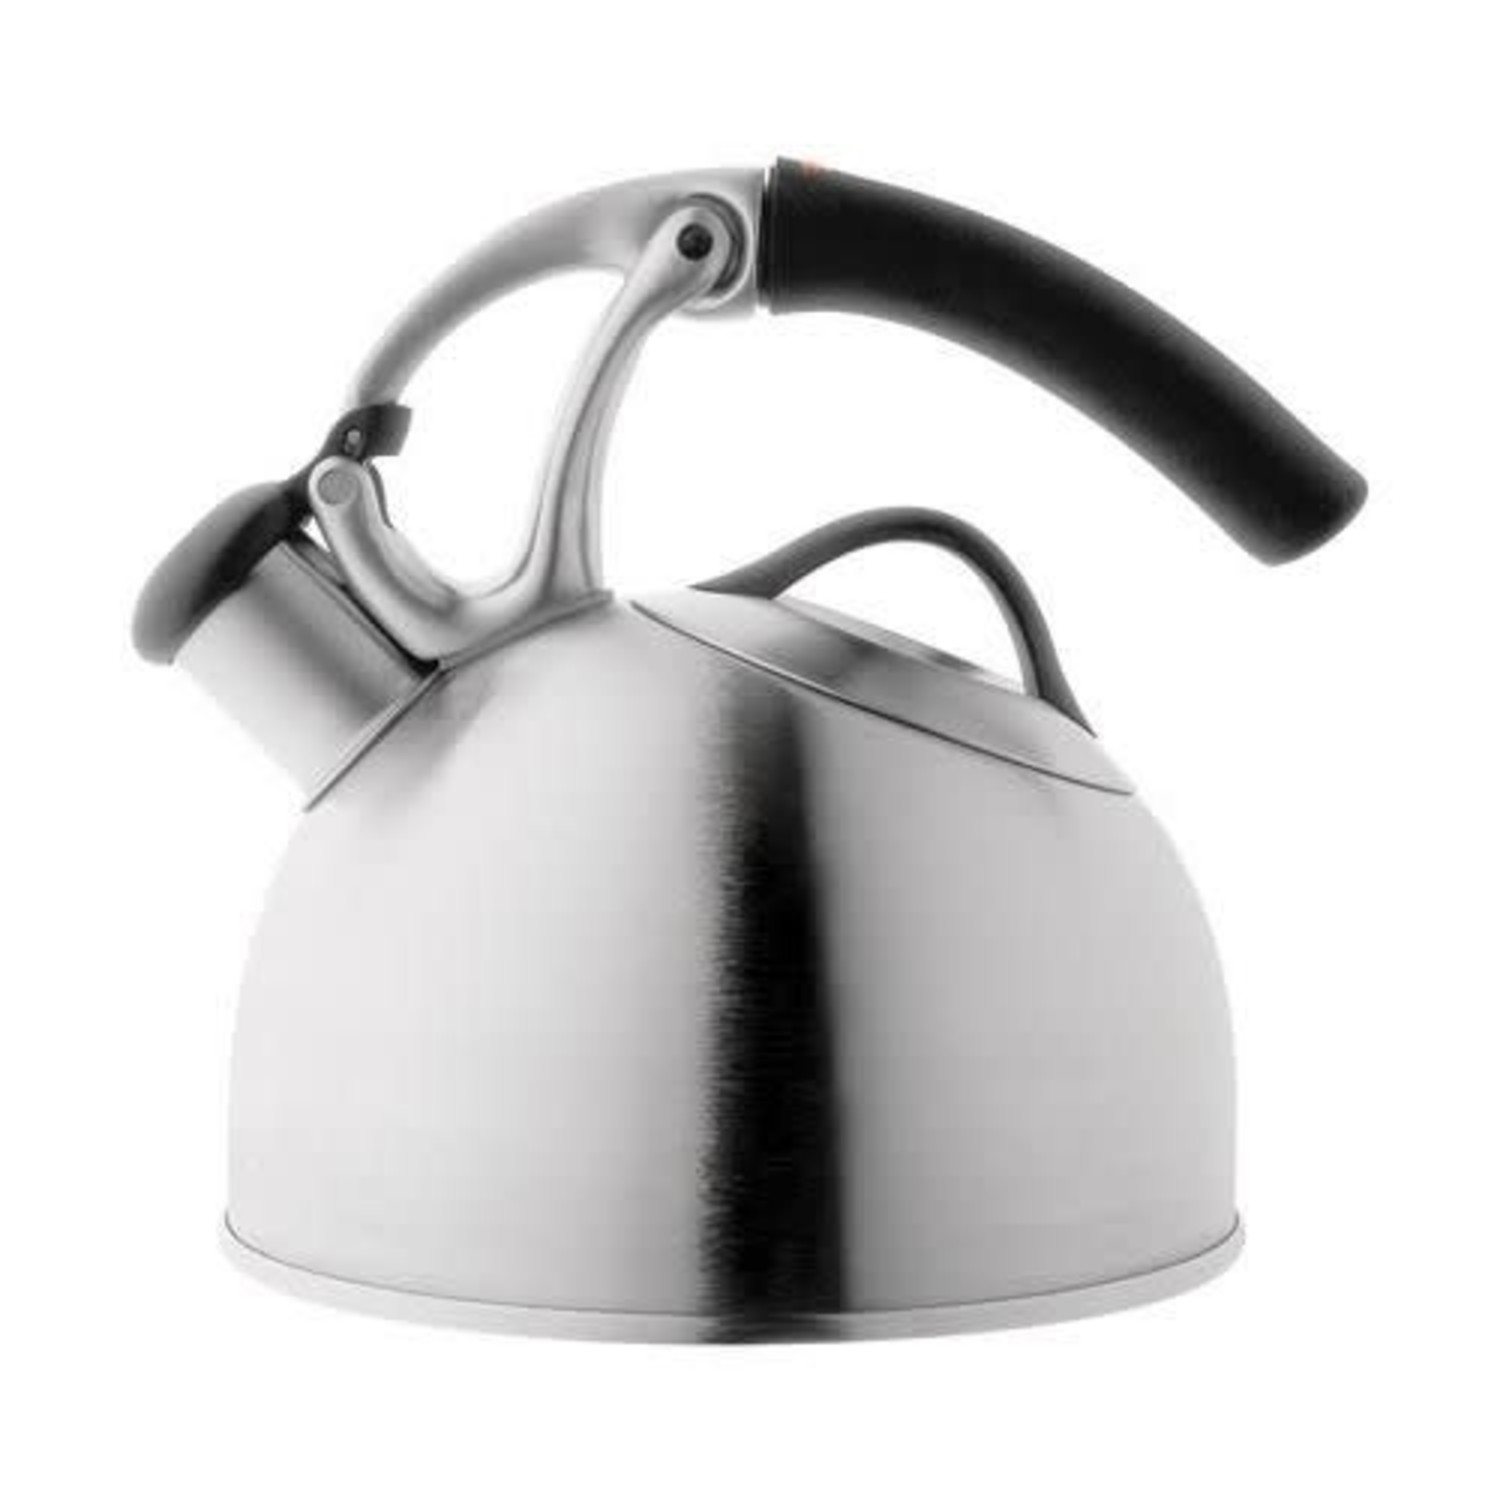 OXO Good Grips Uplift 2 qt. Polished Stainless Steel Tea Kettle